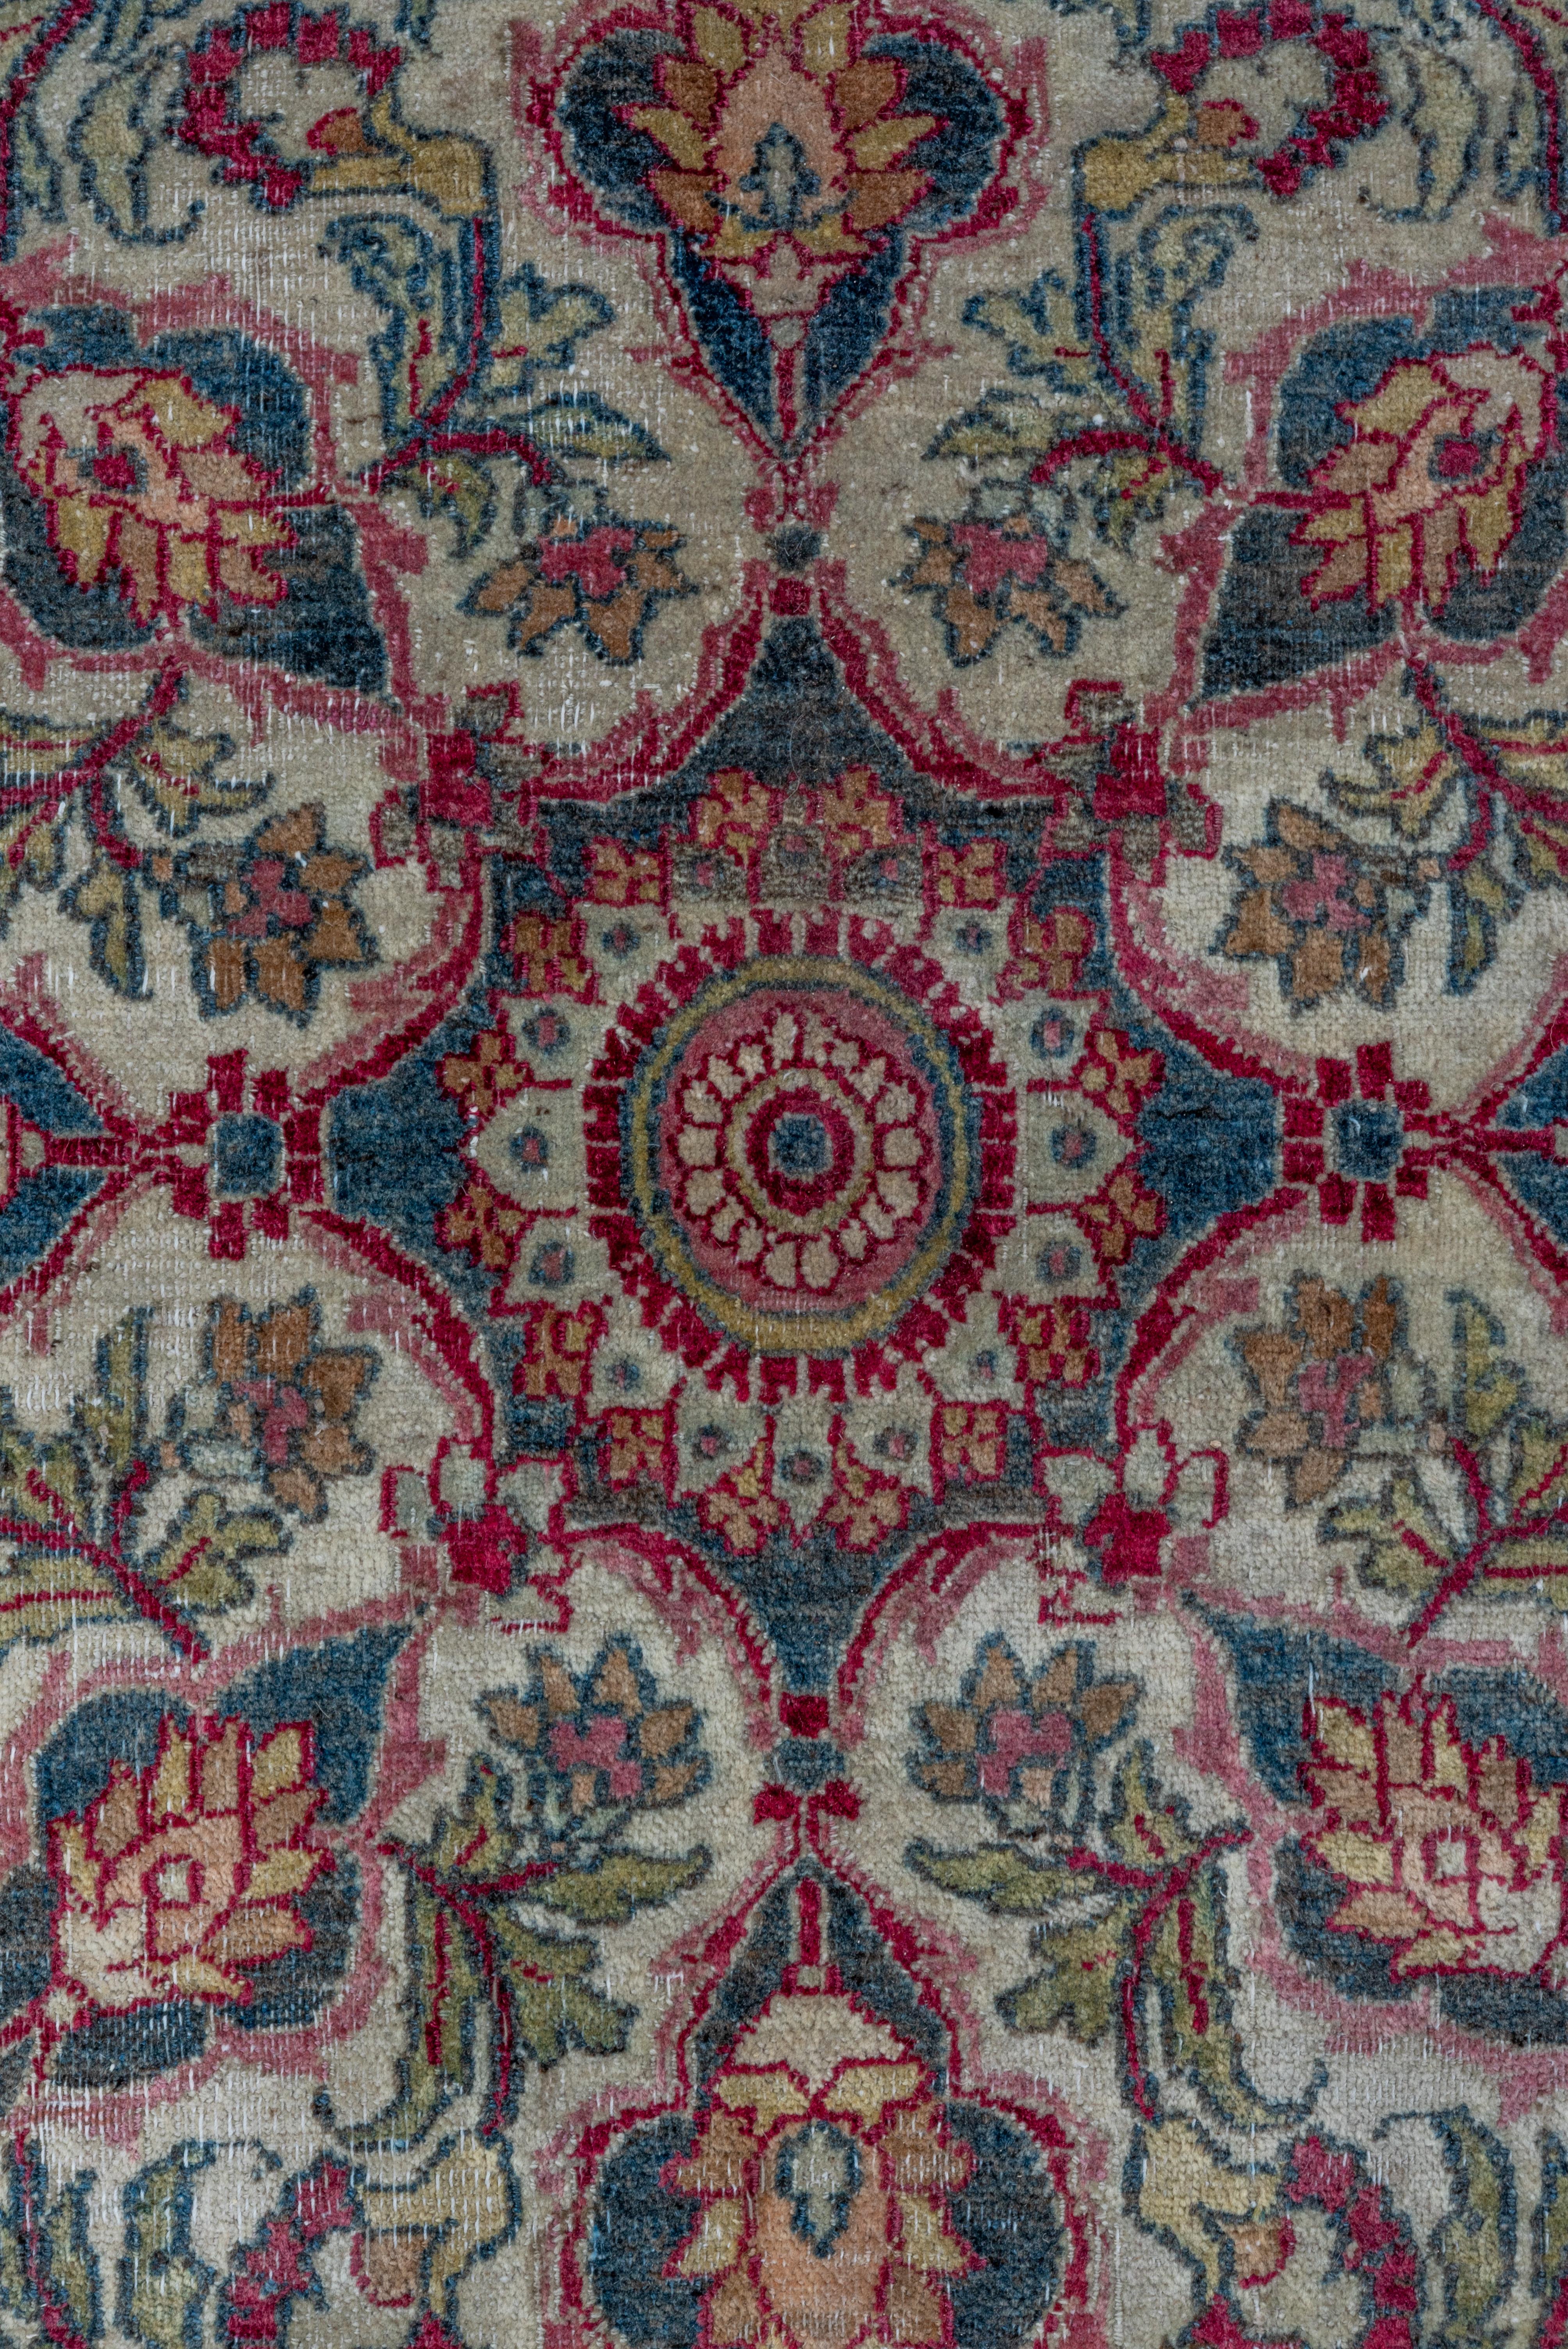 Antique Colorful Persian Khorassan Rug, Red Pink Green and Ivory Tones In Good Condition For Sale In New York, NY